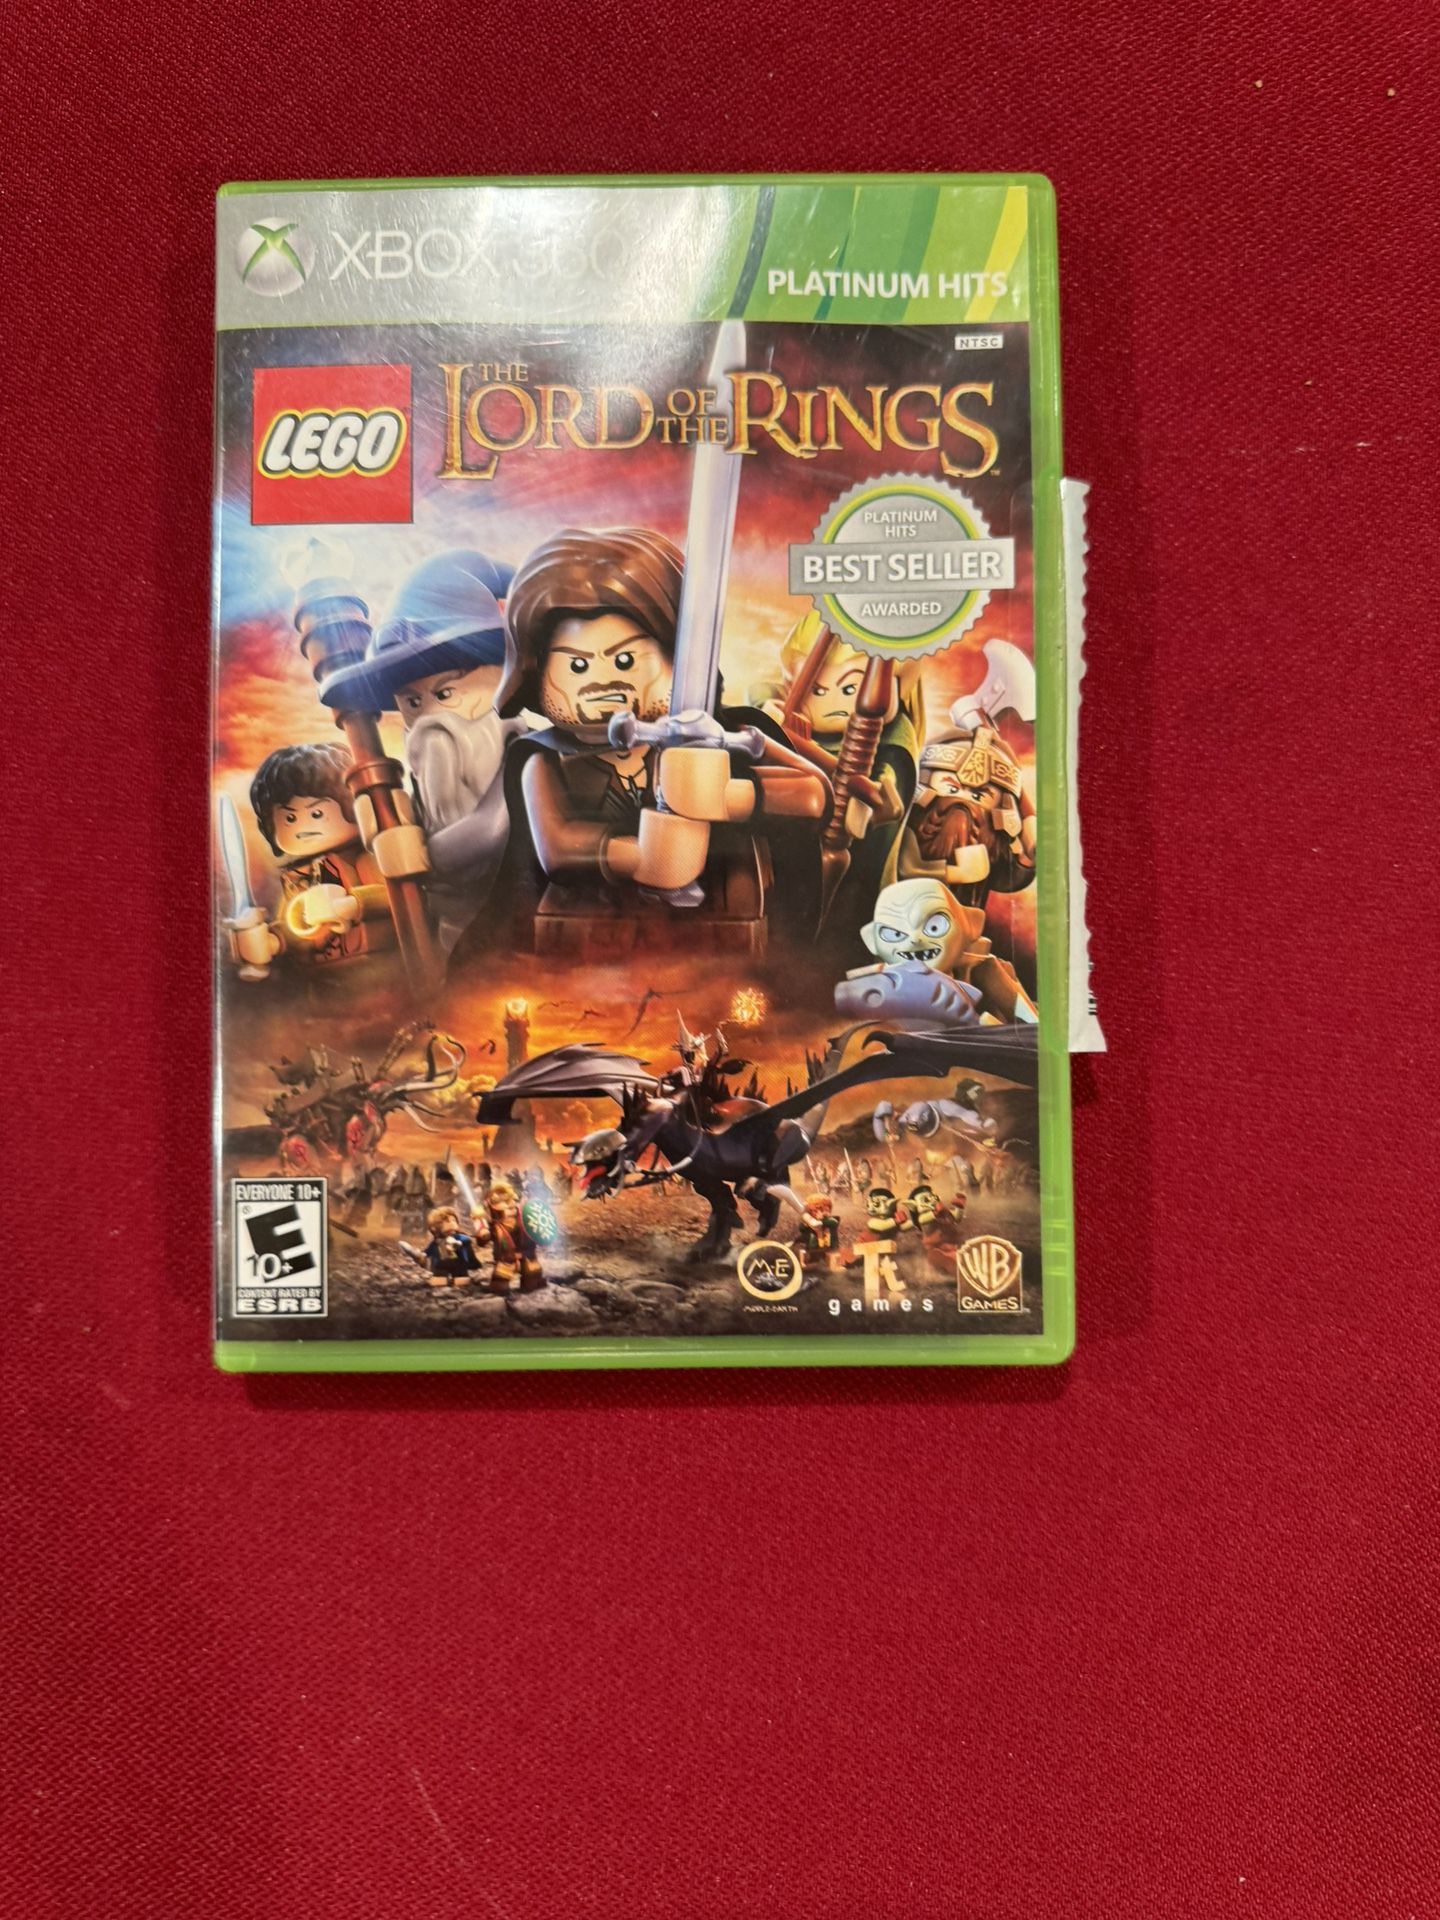 The Lord Of The Rings, Xbox 360